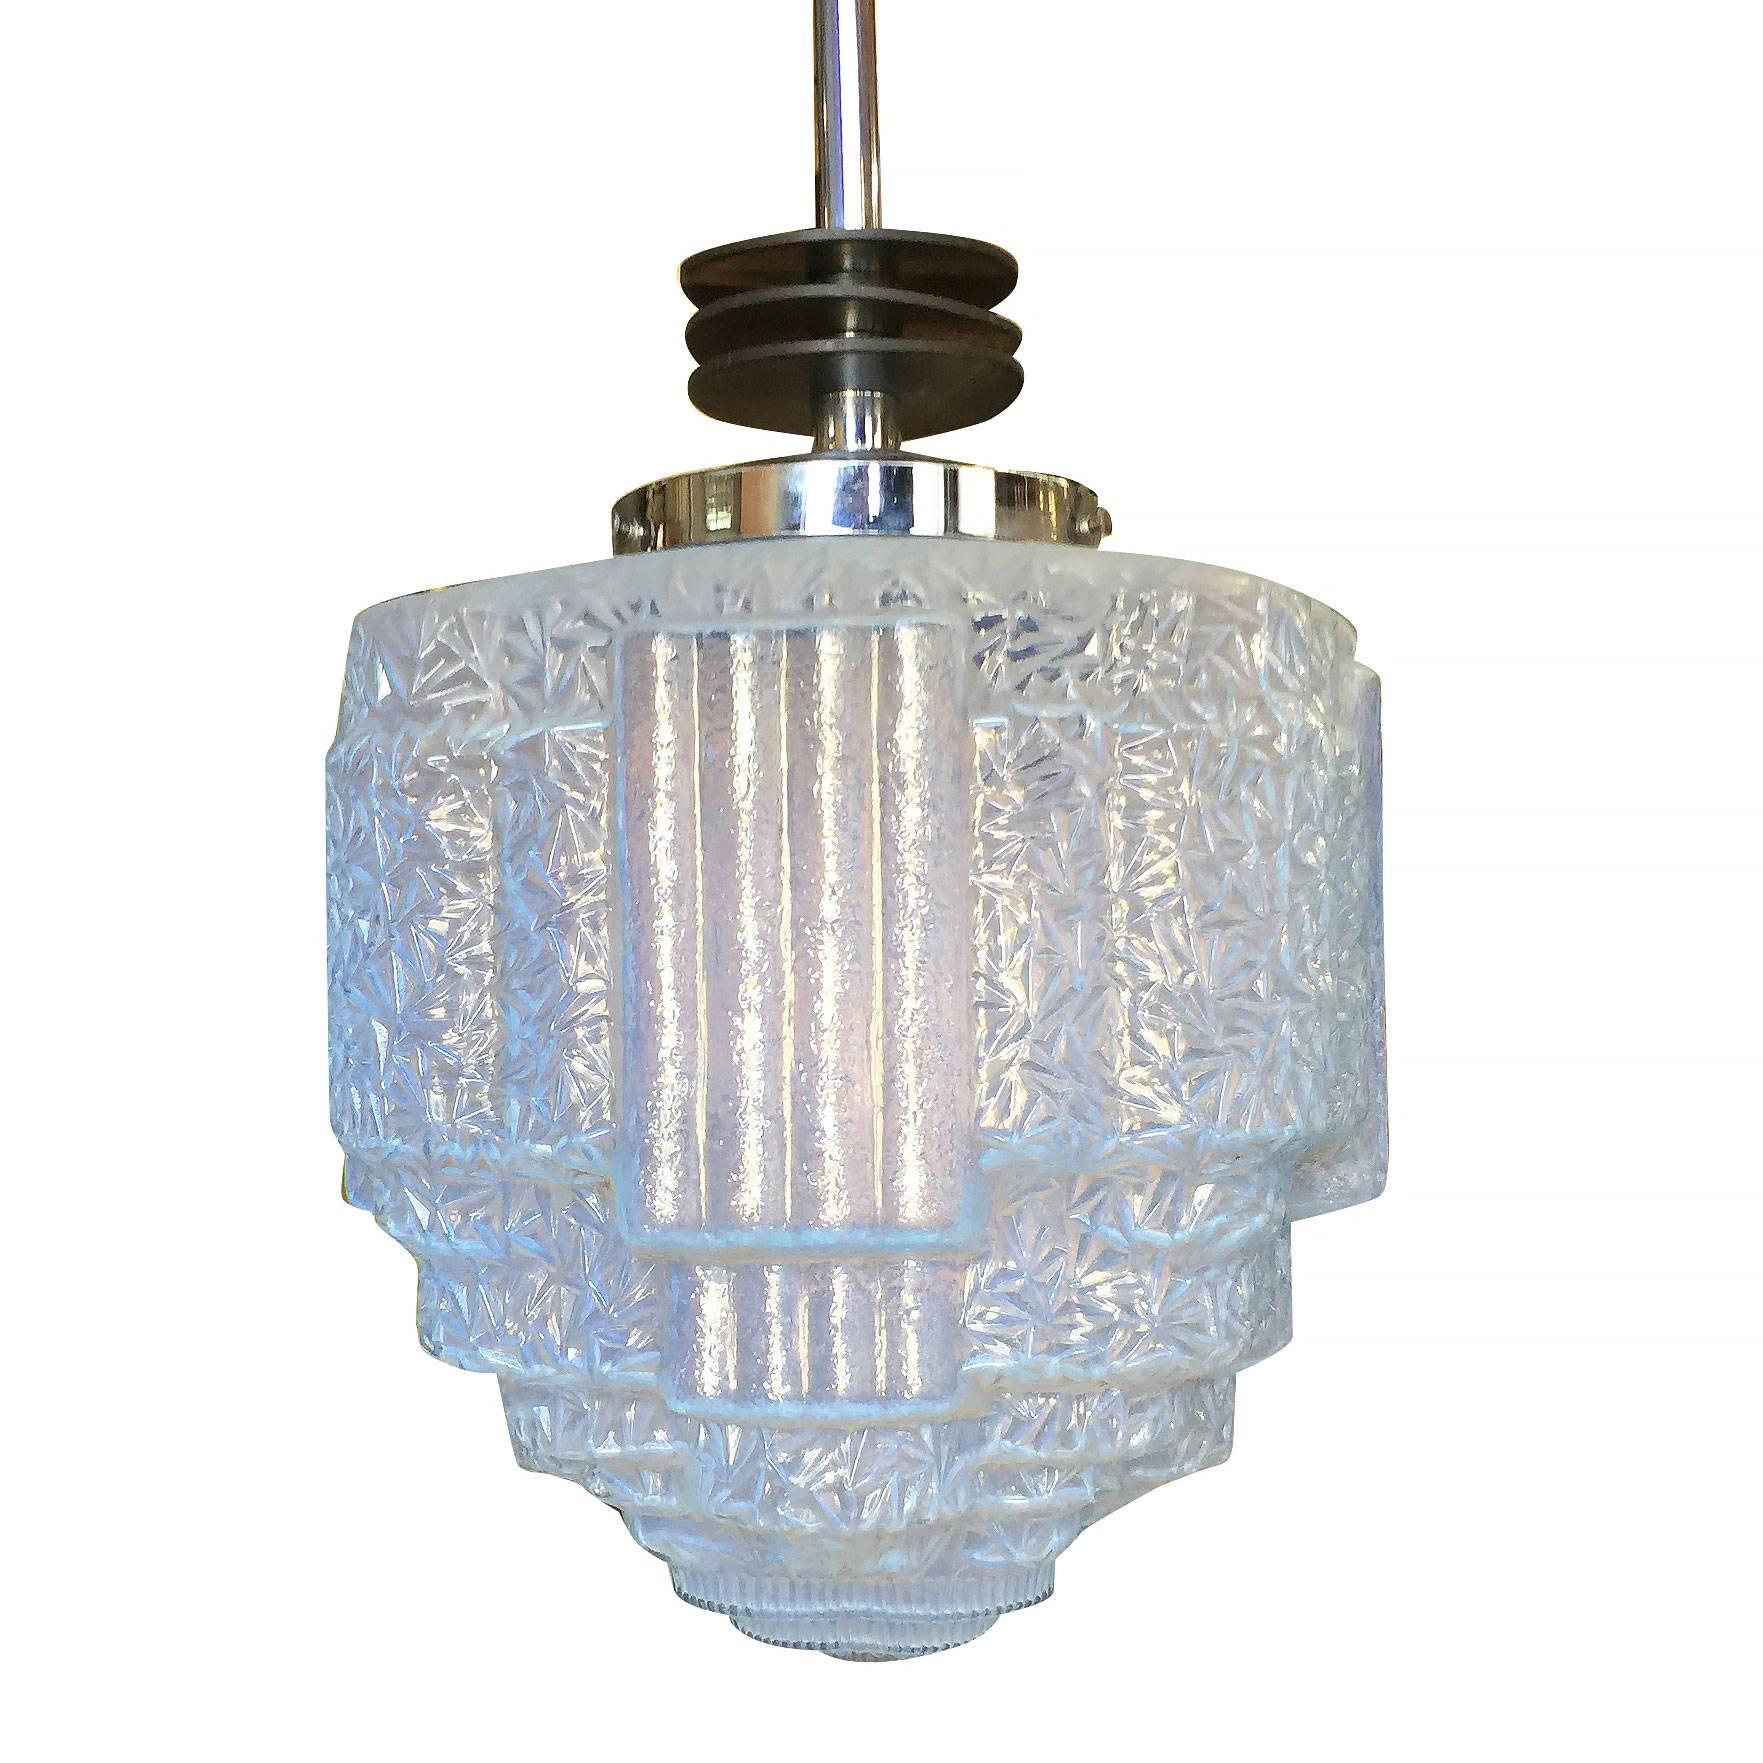 Rare Art Deco chrome ceiling pendant with enameled black streamline accents and texture blue glass Art Deco glass globe.
 